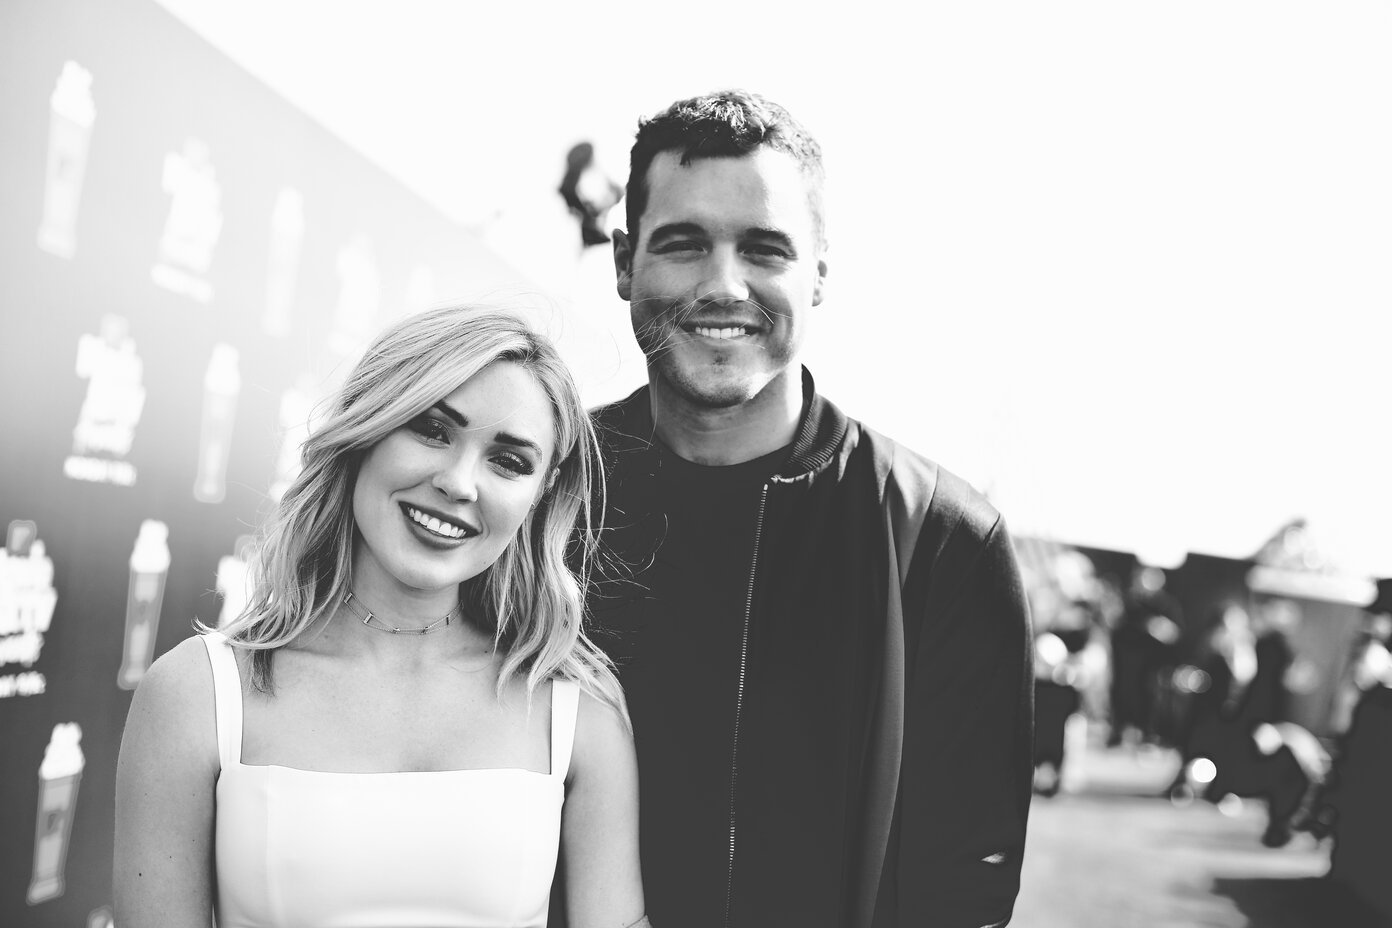 Cassie Randolph and Colton Underwood attend the 2019 MTV Movie and TV Awards at Barker Hangar on June 15, 2019 in Santa Monica, California